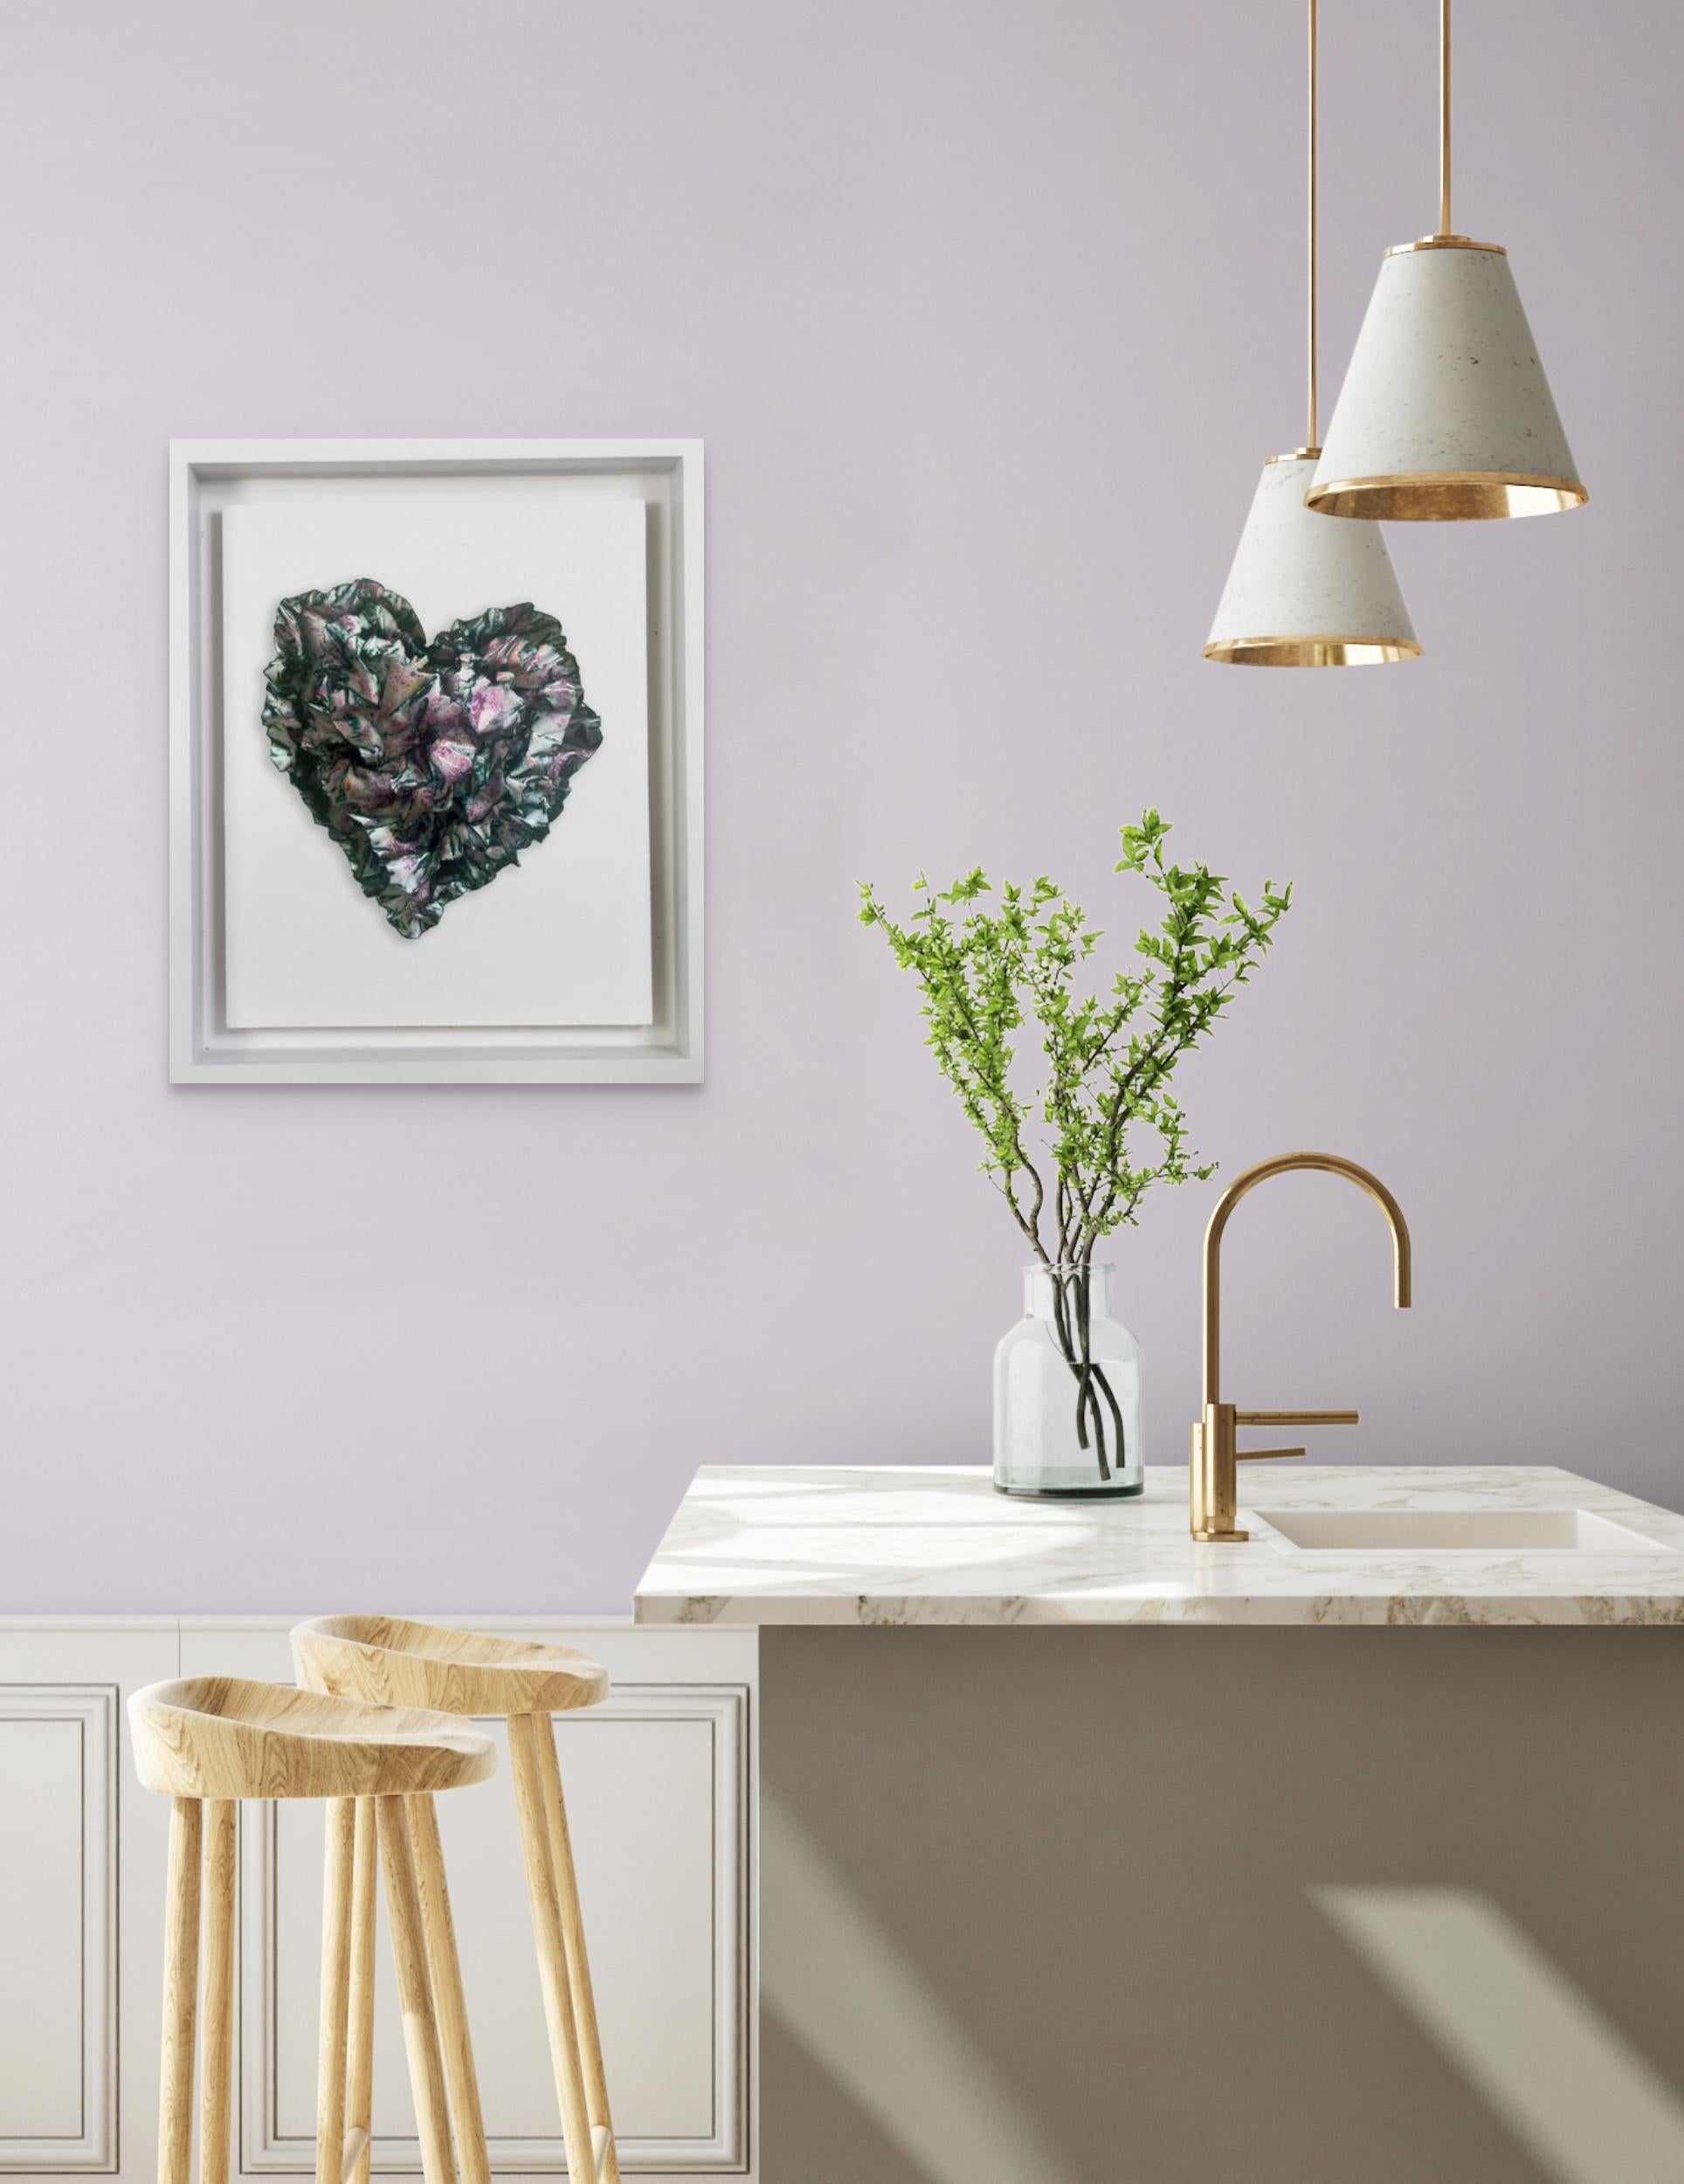 This heart shaped sculpture is layered in a playful purple with hints of yellow and rich orange lightly scattered throughout the sculpture.    The initial layers of white help bring a brightness to the colors, showcasing the purples where the colors